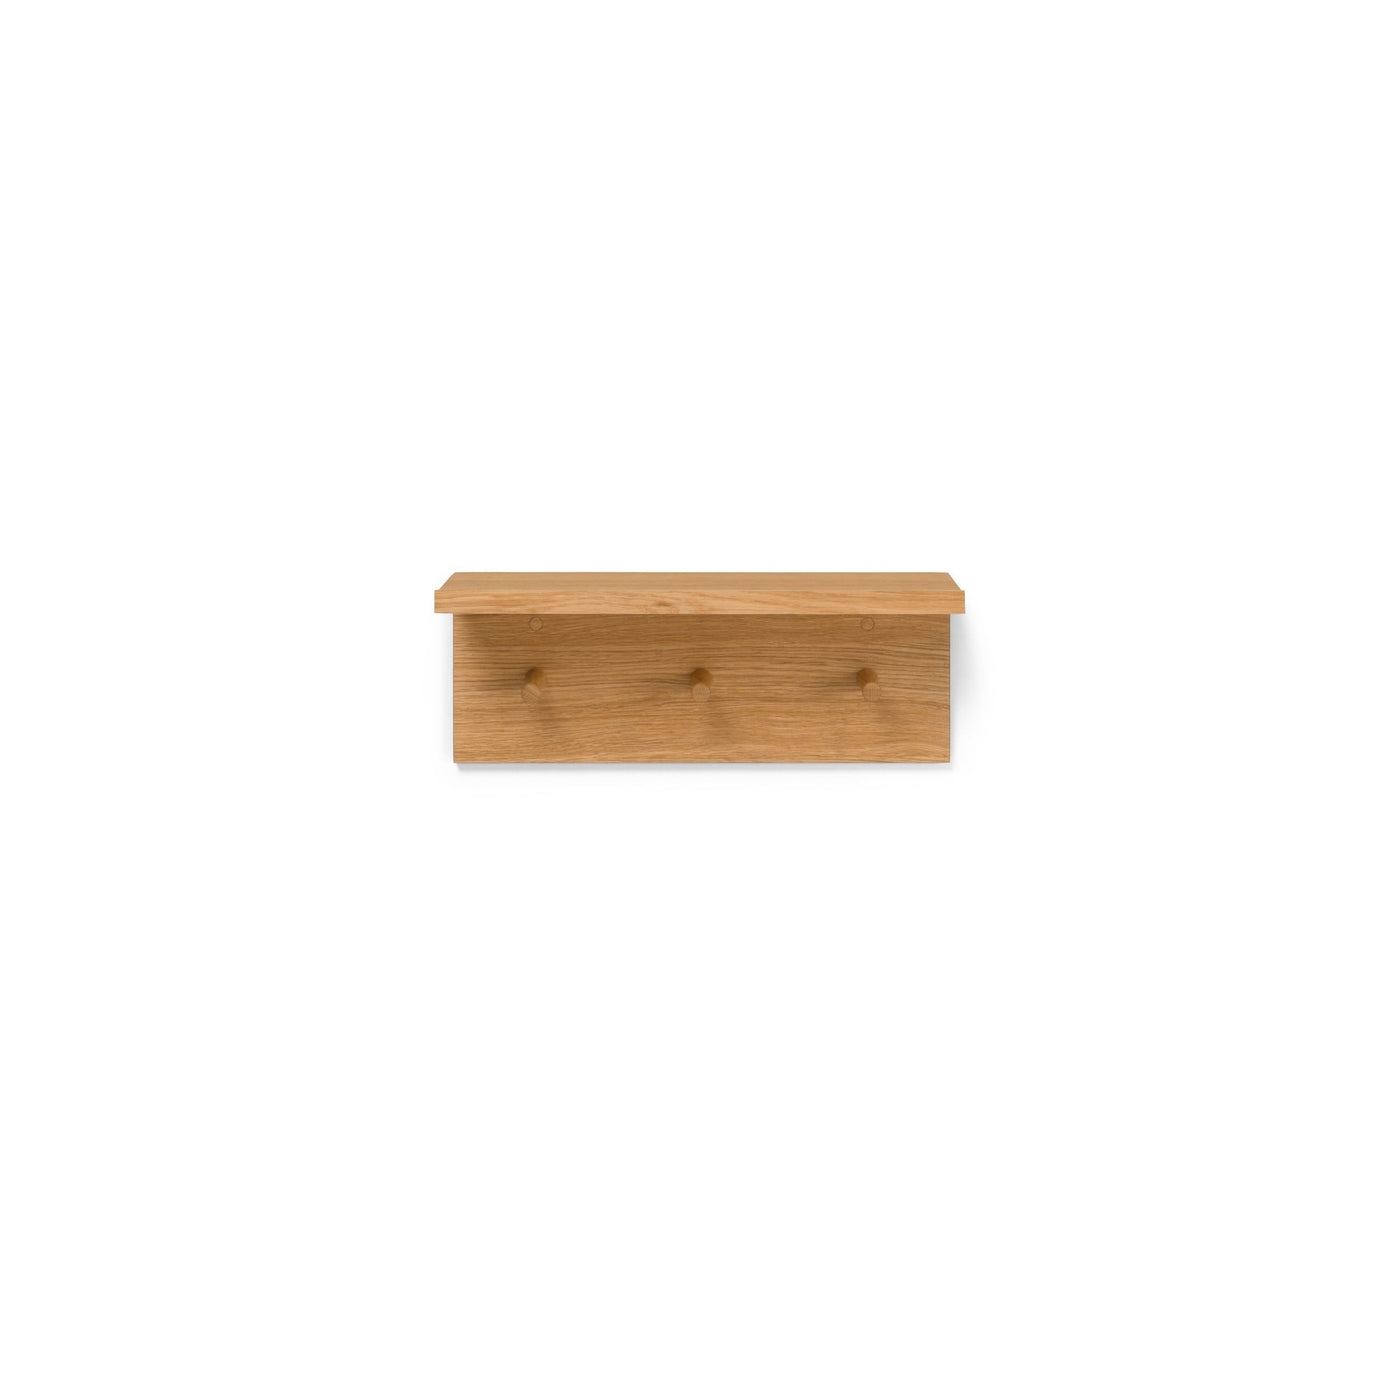 Ferm Living Place Rack small. Free UK delivery at someday designs #size_small